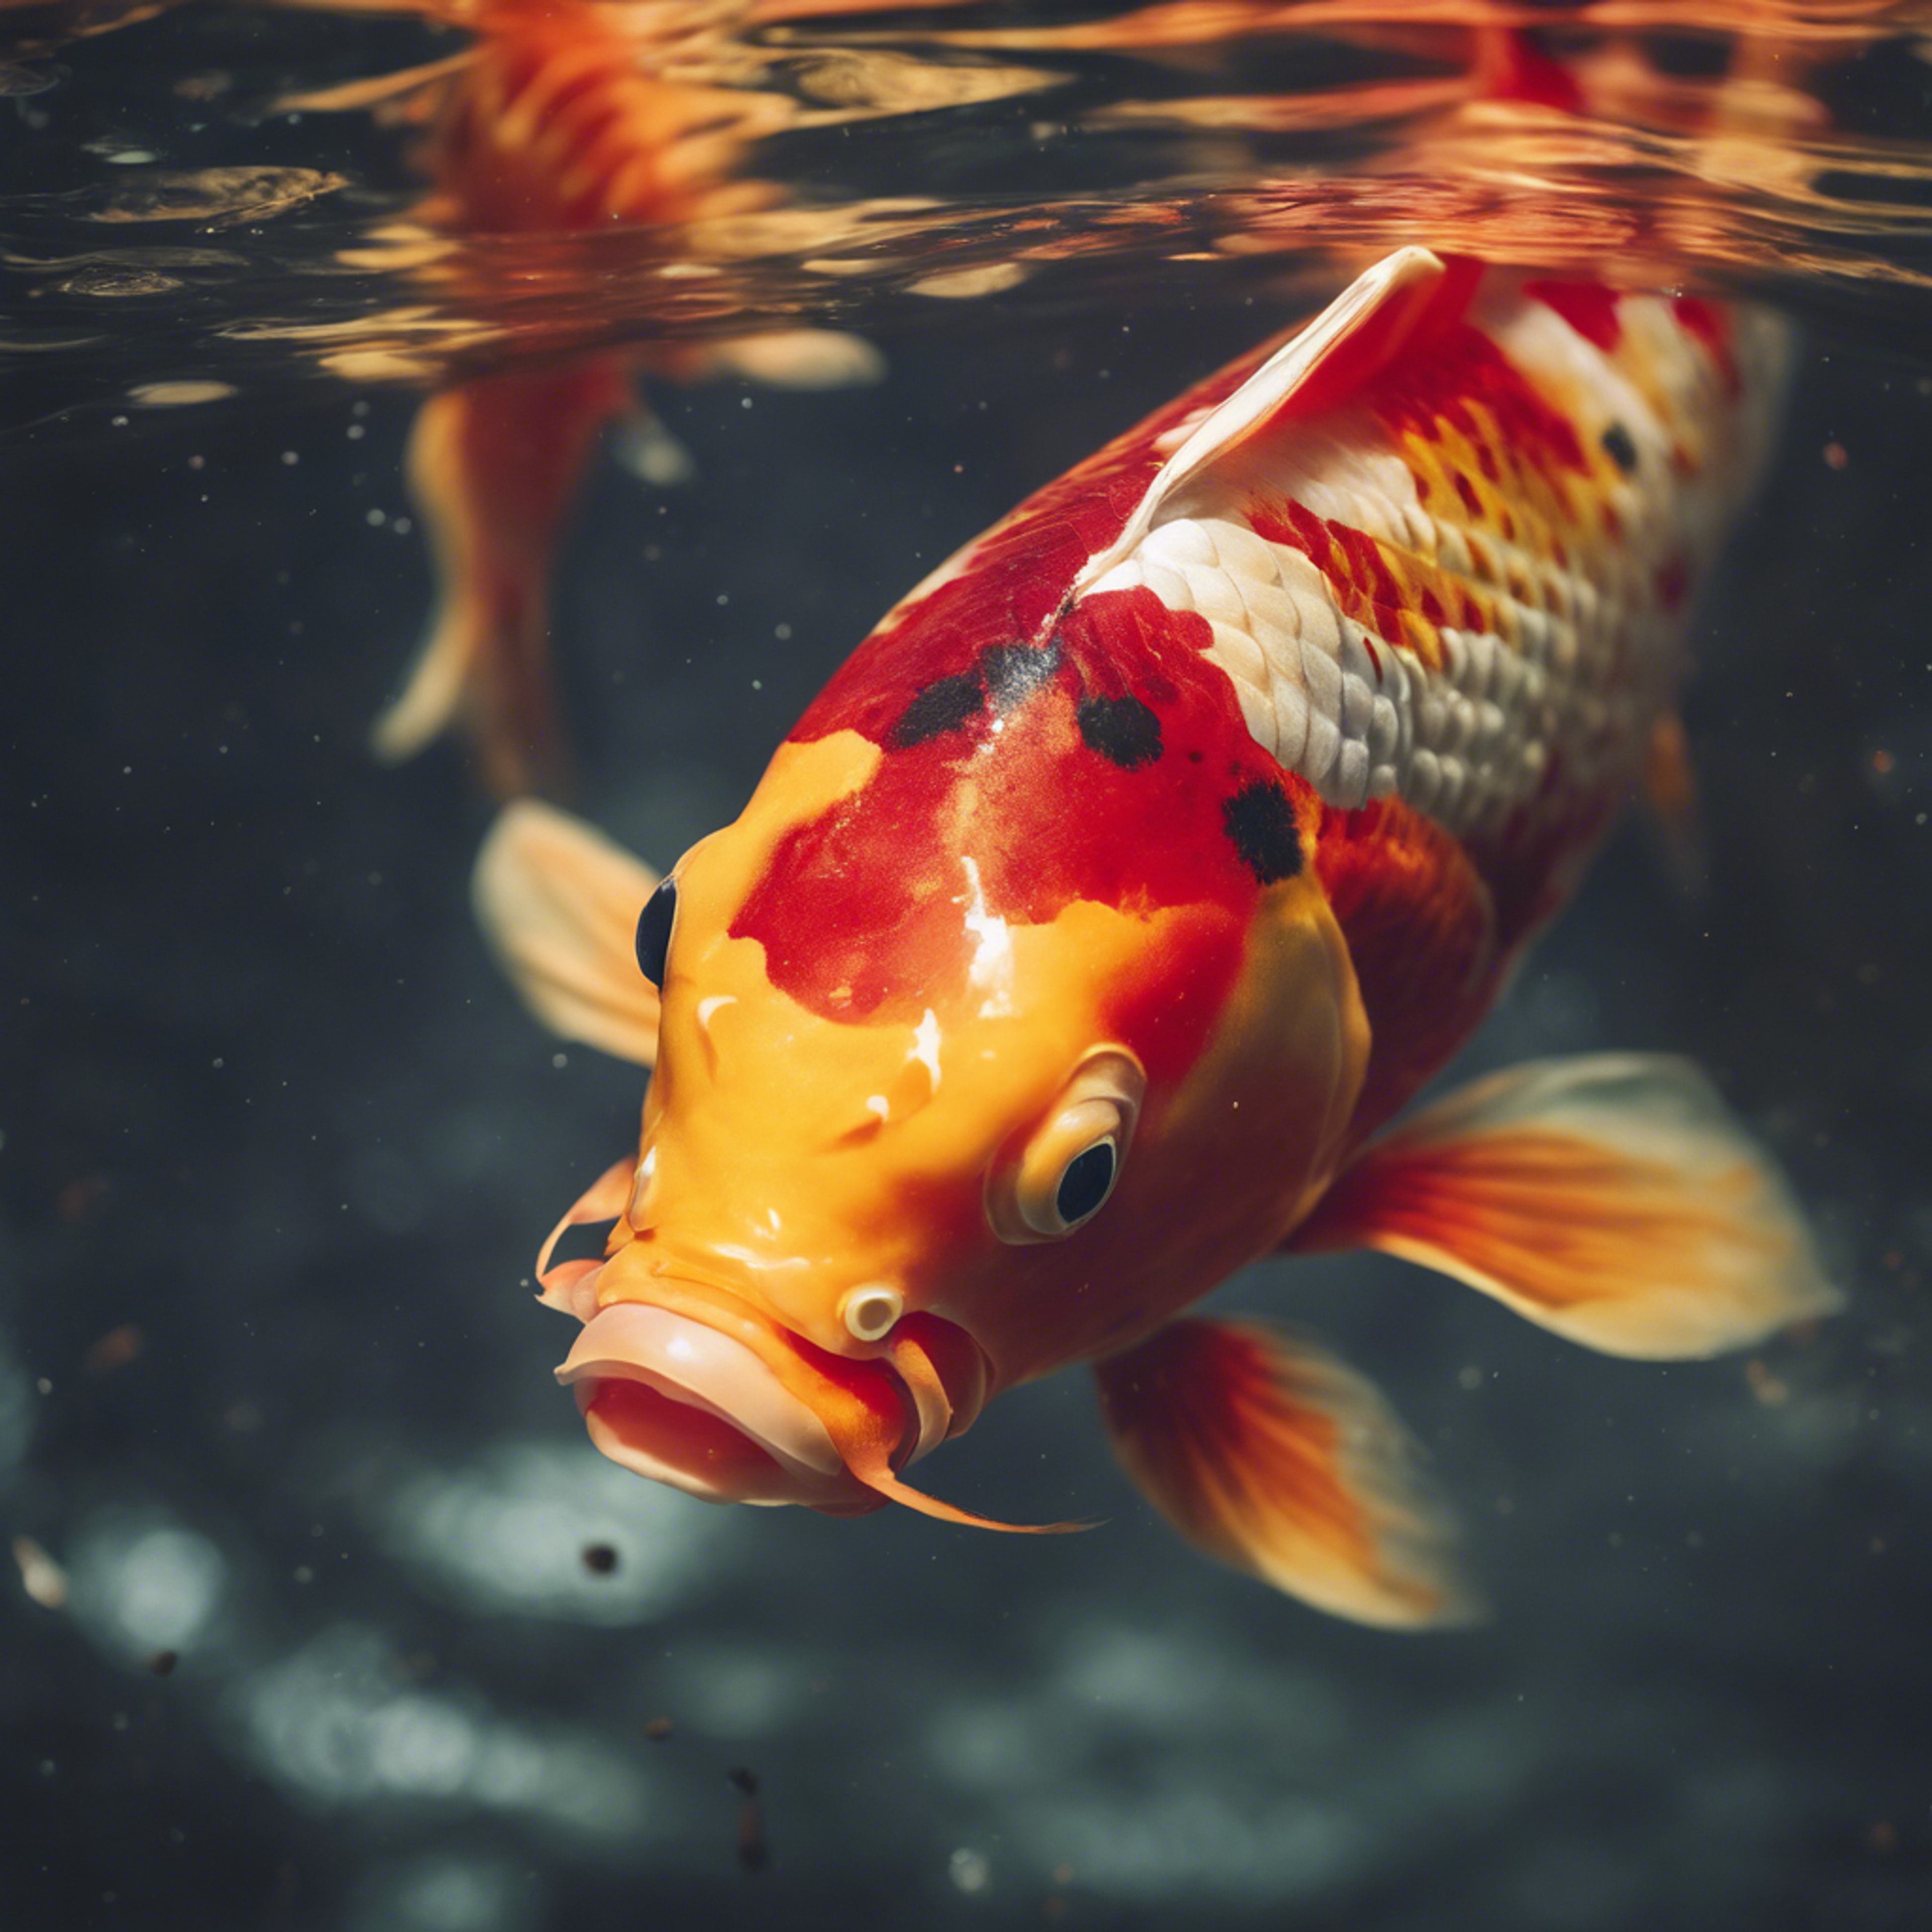 A vibrant red and gold koi fish swimming in a clear pond. Wallpaper[1dfeb98f60cb429caecb]